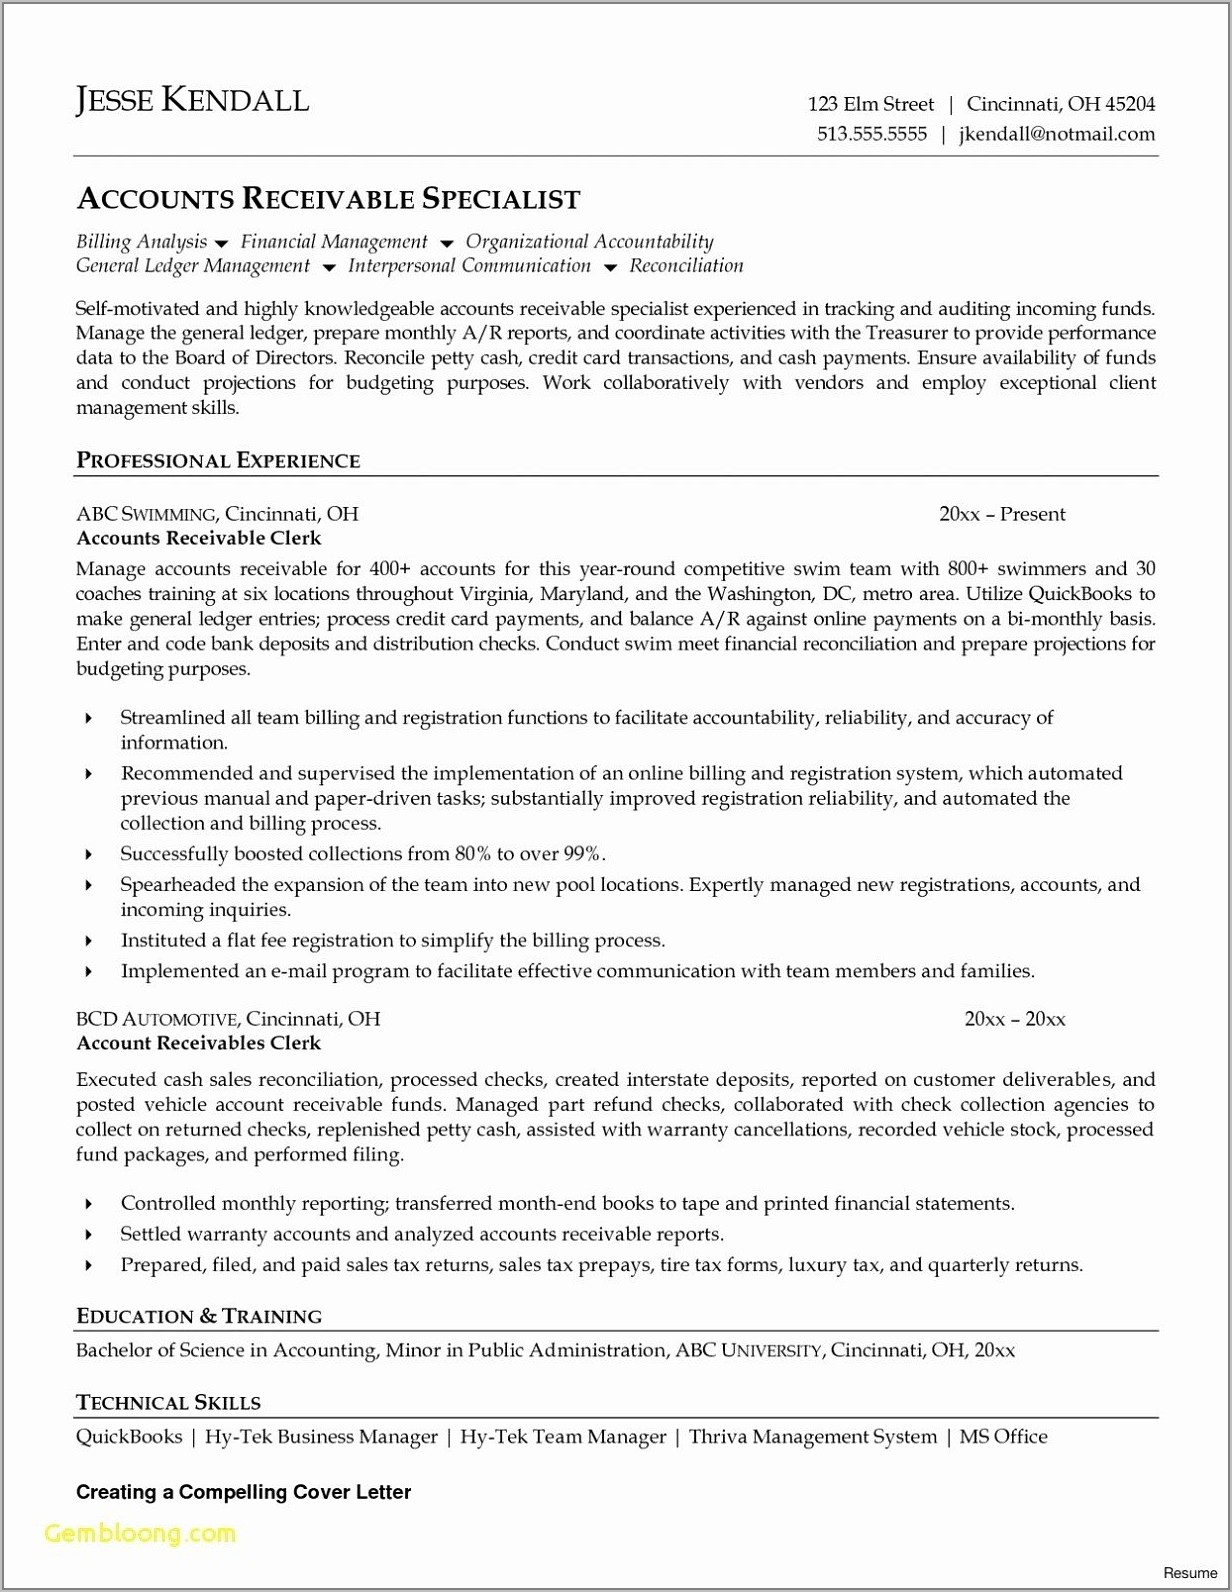 Sample Resume For Accounts Receivable Specialist